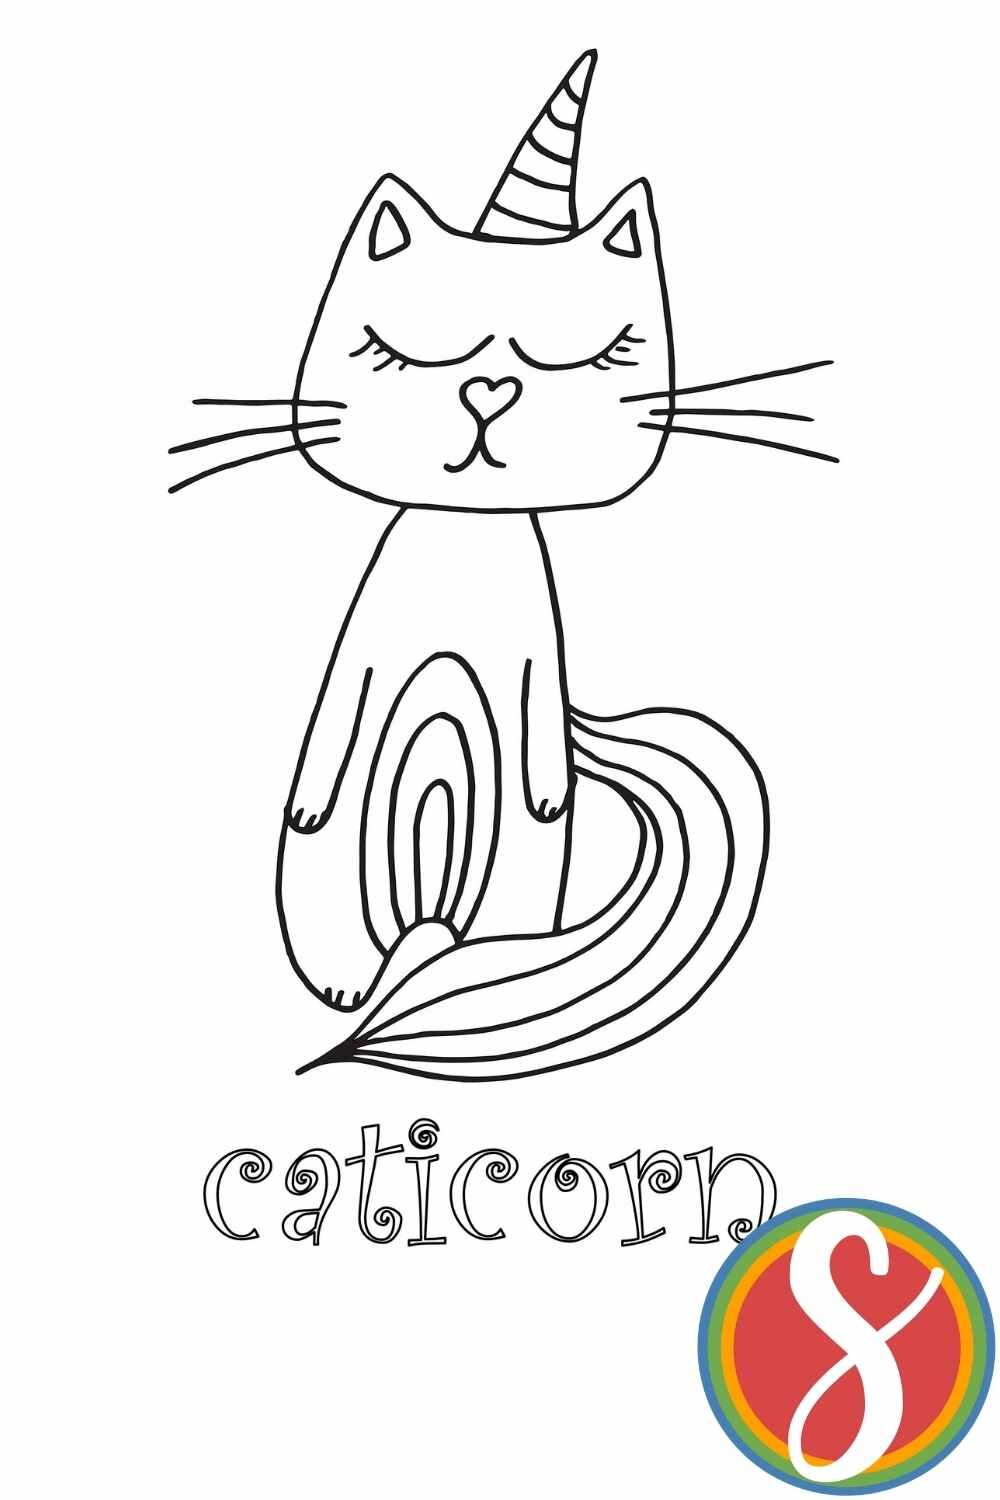 Free Caticorn coloring page from Stevie Doodles